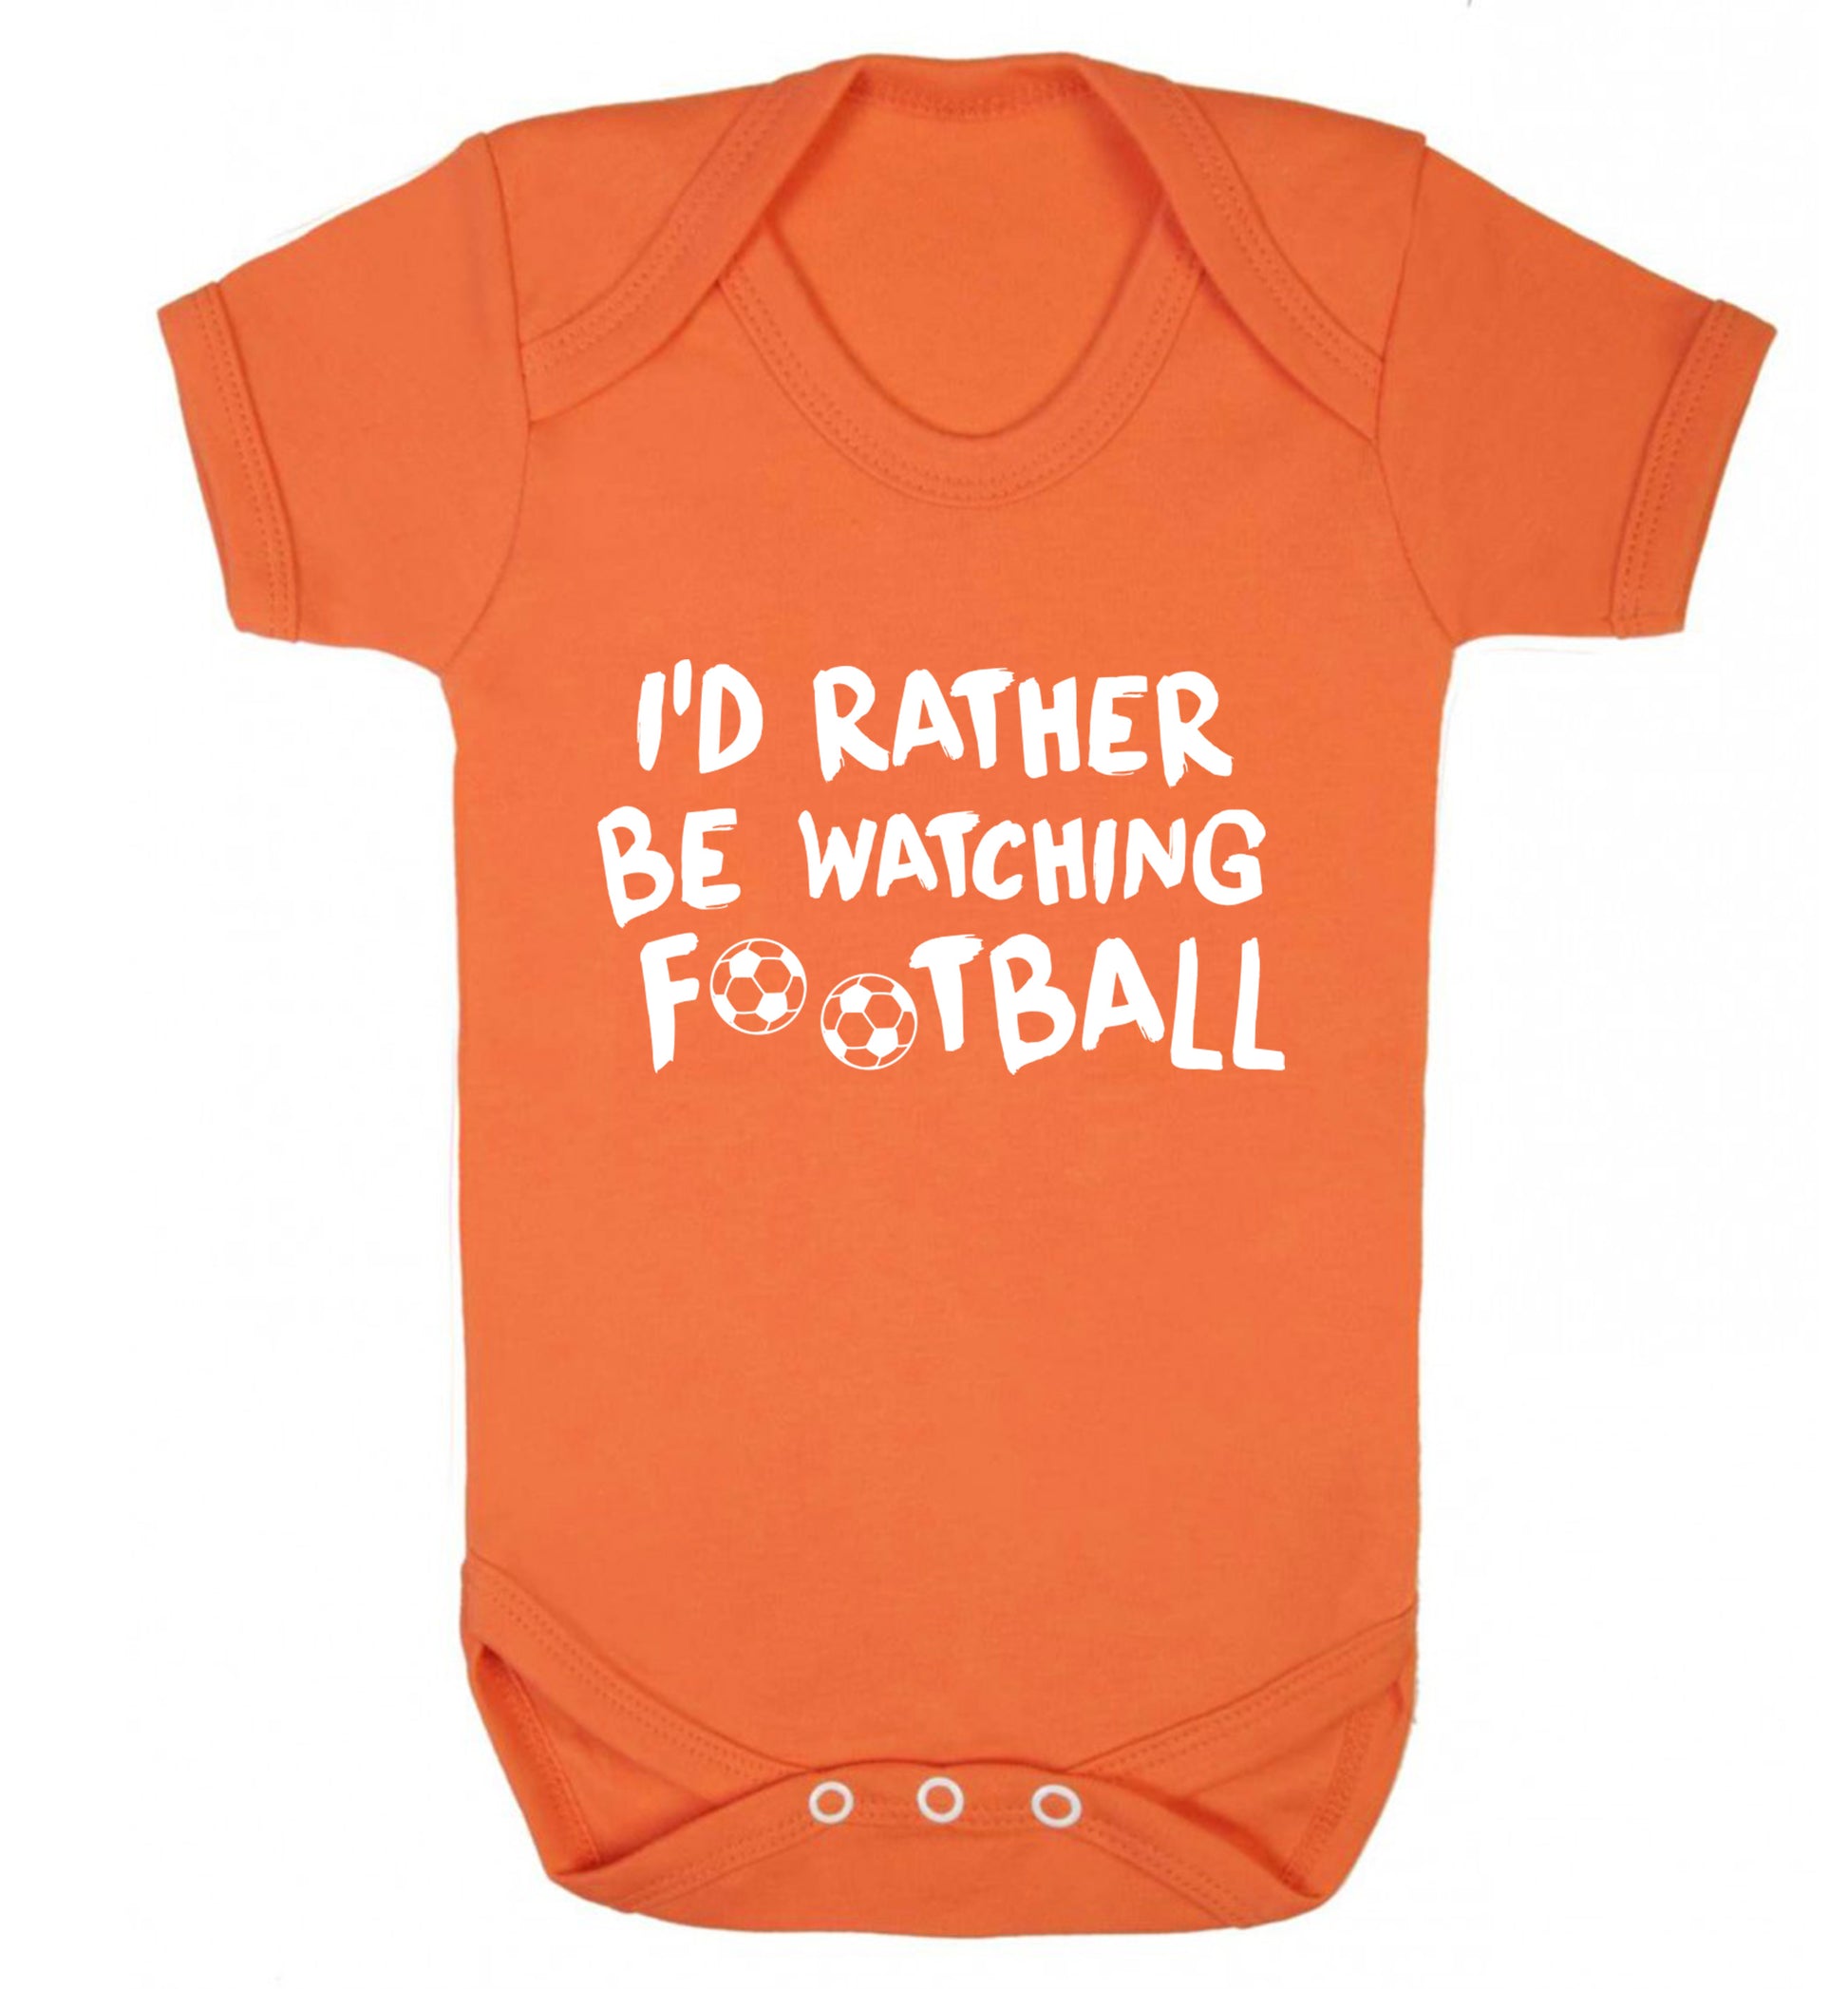 I'd rather be watching football Baby Vest orange 18-24 months